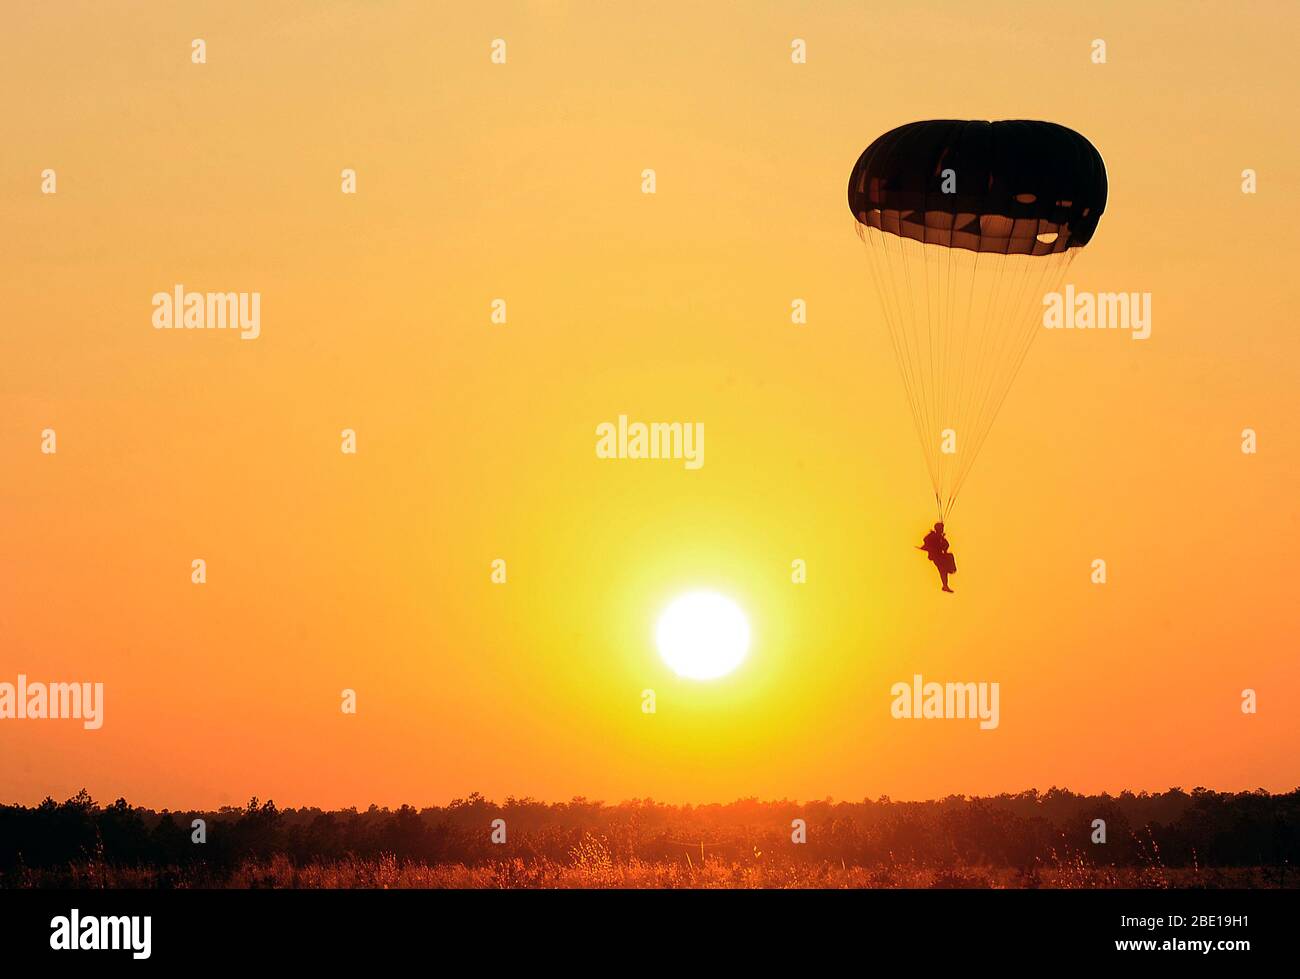 A U.S. Army Ranger assigned to the 6th Ranger Training Battalion parachutes during a static line jump Nov. 25, 2009, Camp Rudder, Fla. Stock Photo